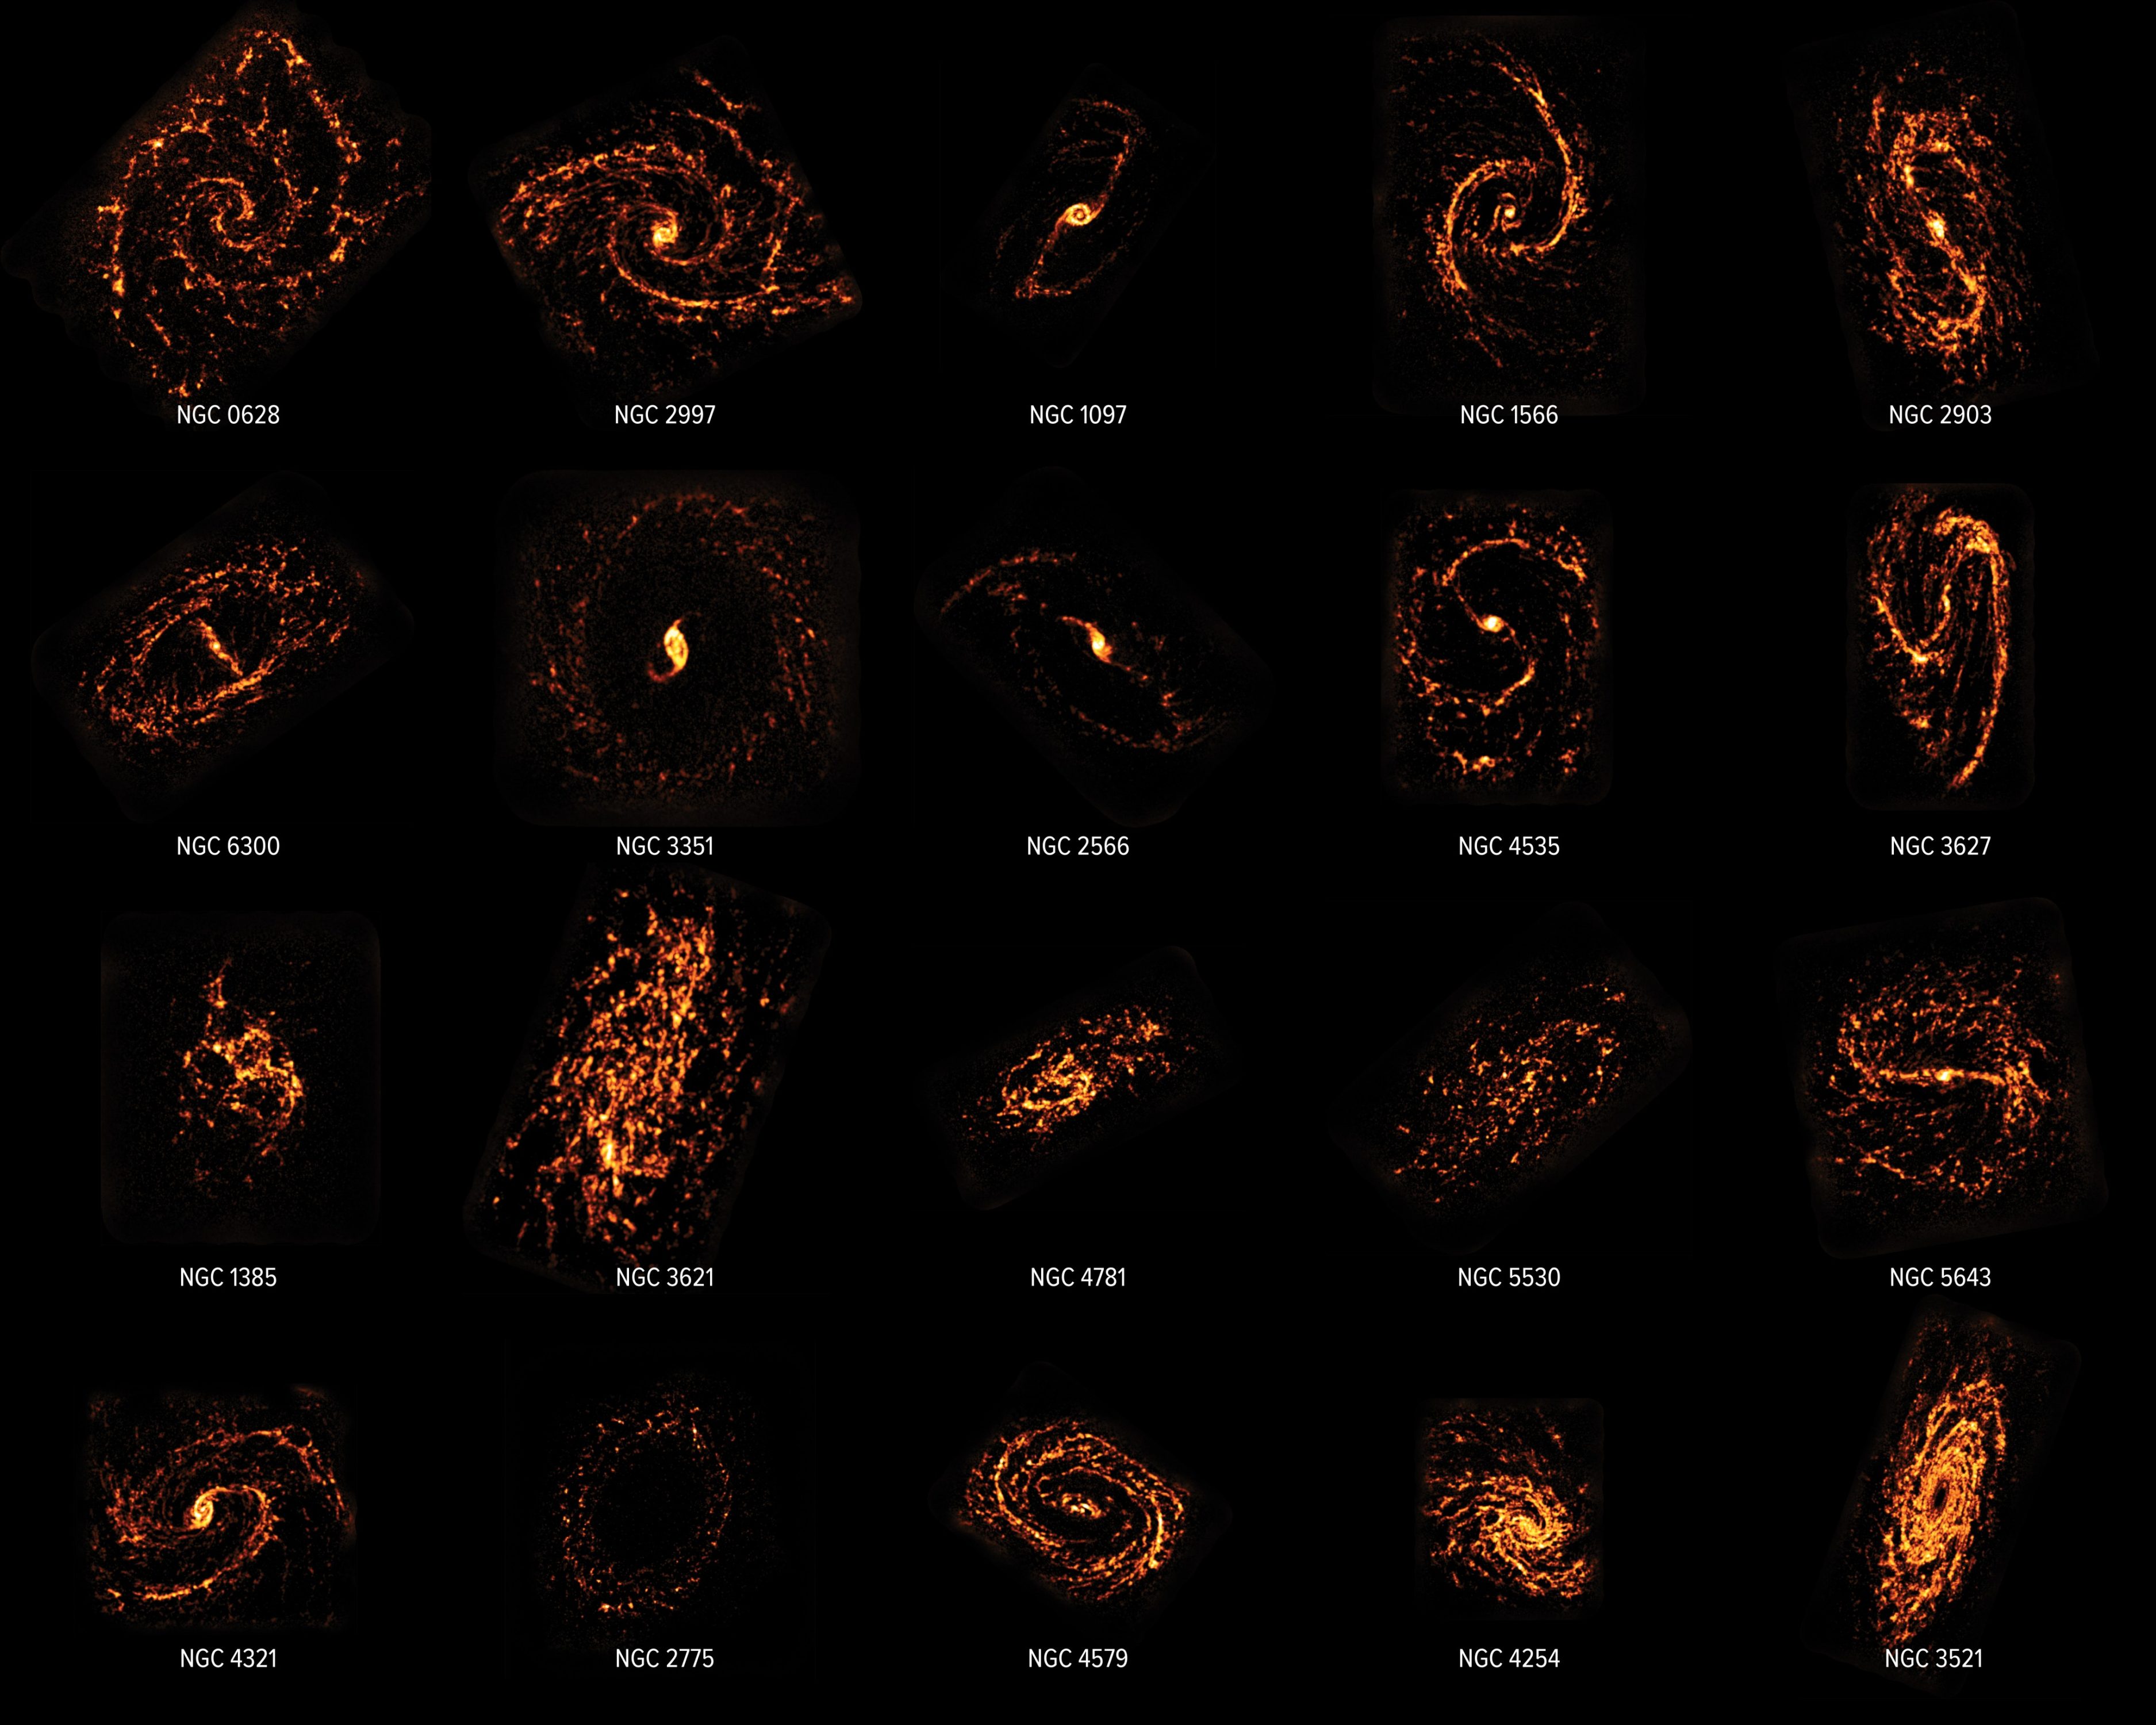 Using the Atacama Large Millimeter/submillimeter Array (ALMA), scientists completed a census of nearly 100 galaxies in the nearby Universe, showcasing their behaviors and appearances. The scientists compared ALMA data to that of the Hubble Space Telescope, shown in composite here. The survey concluded that contrary to popular scientific opinion, stellar nurseries do not all look and act the same. In fact, as shown here, they are as different as the neighborhoods, cities, regions, and countries that make up our own world. Credit: ALMA (ESO/NAOJ/NRAO)/PHANGS, S. Dagnello (NRAO)